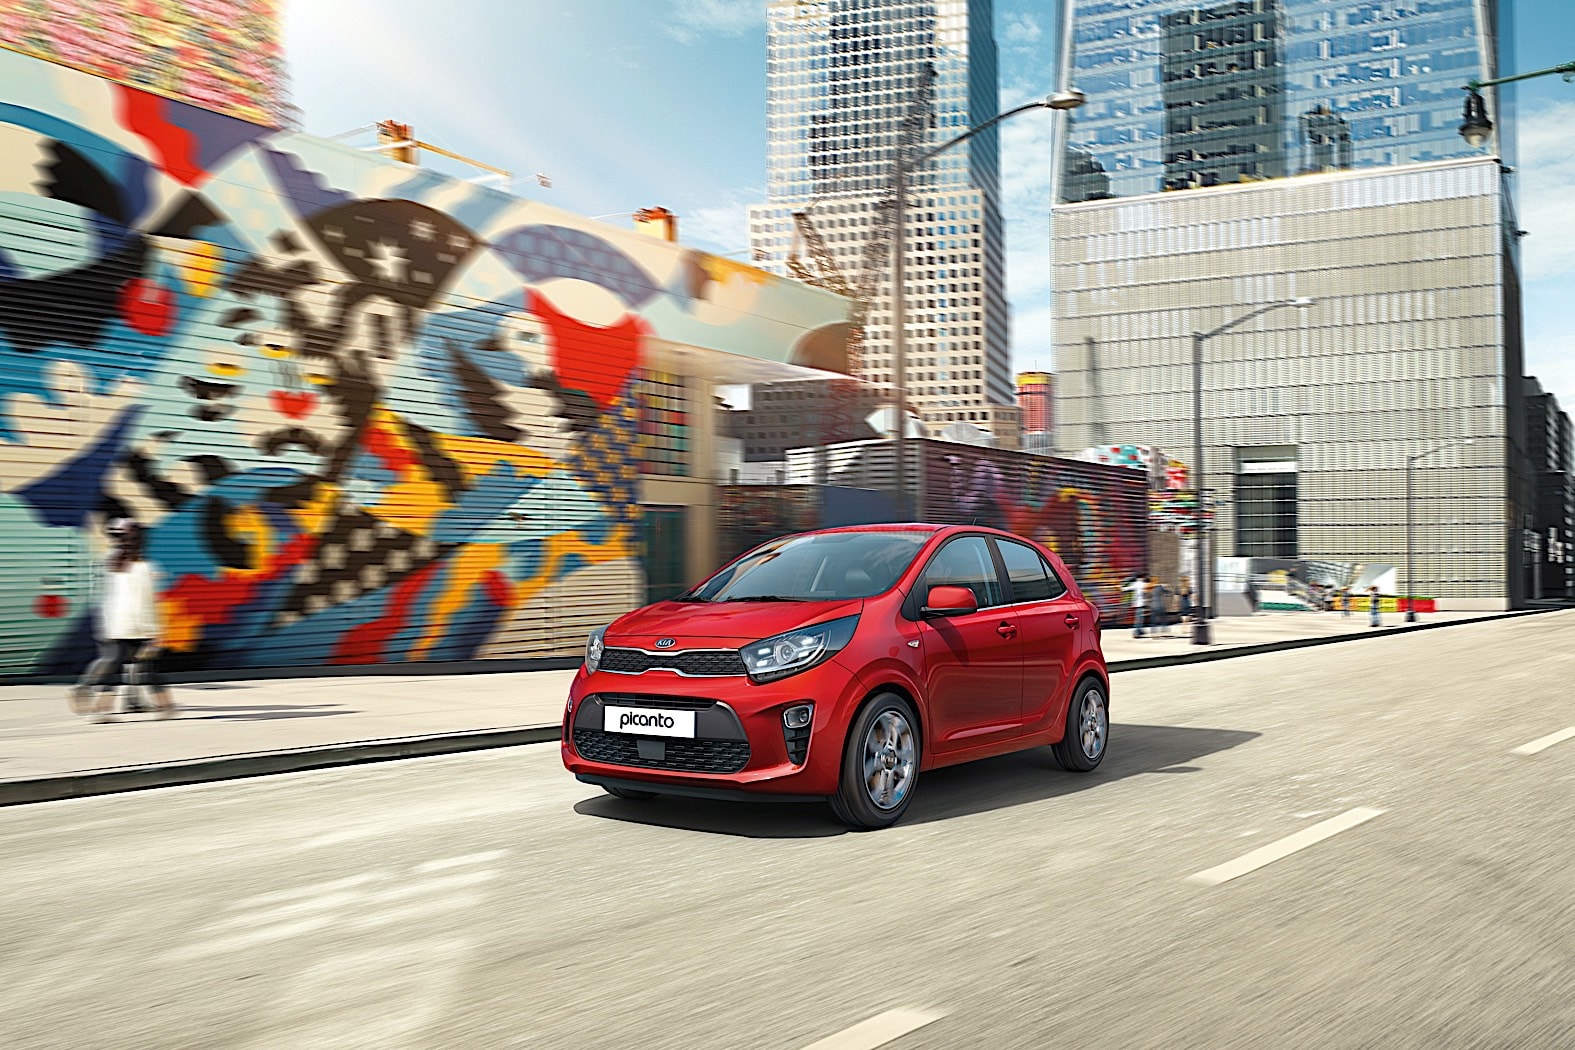 2021 Kia Picanto Gets Spicy with New Looks and Automated